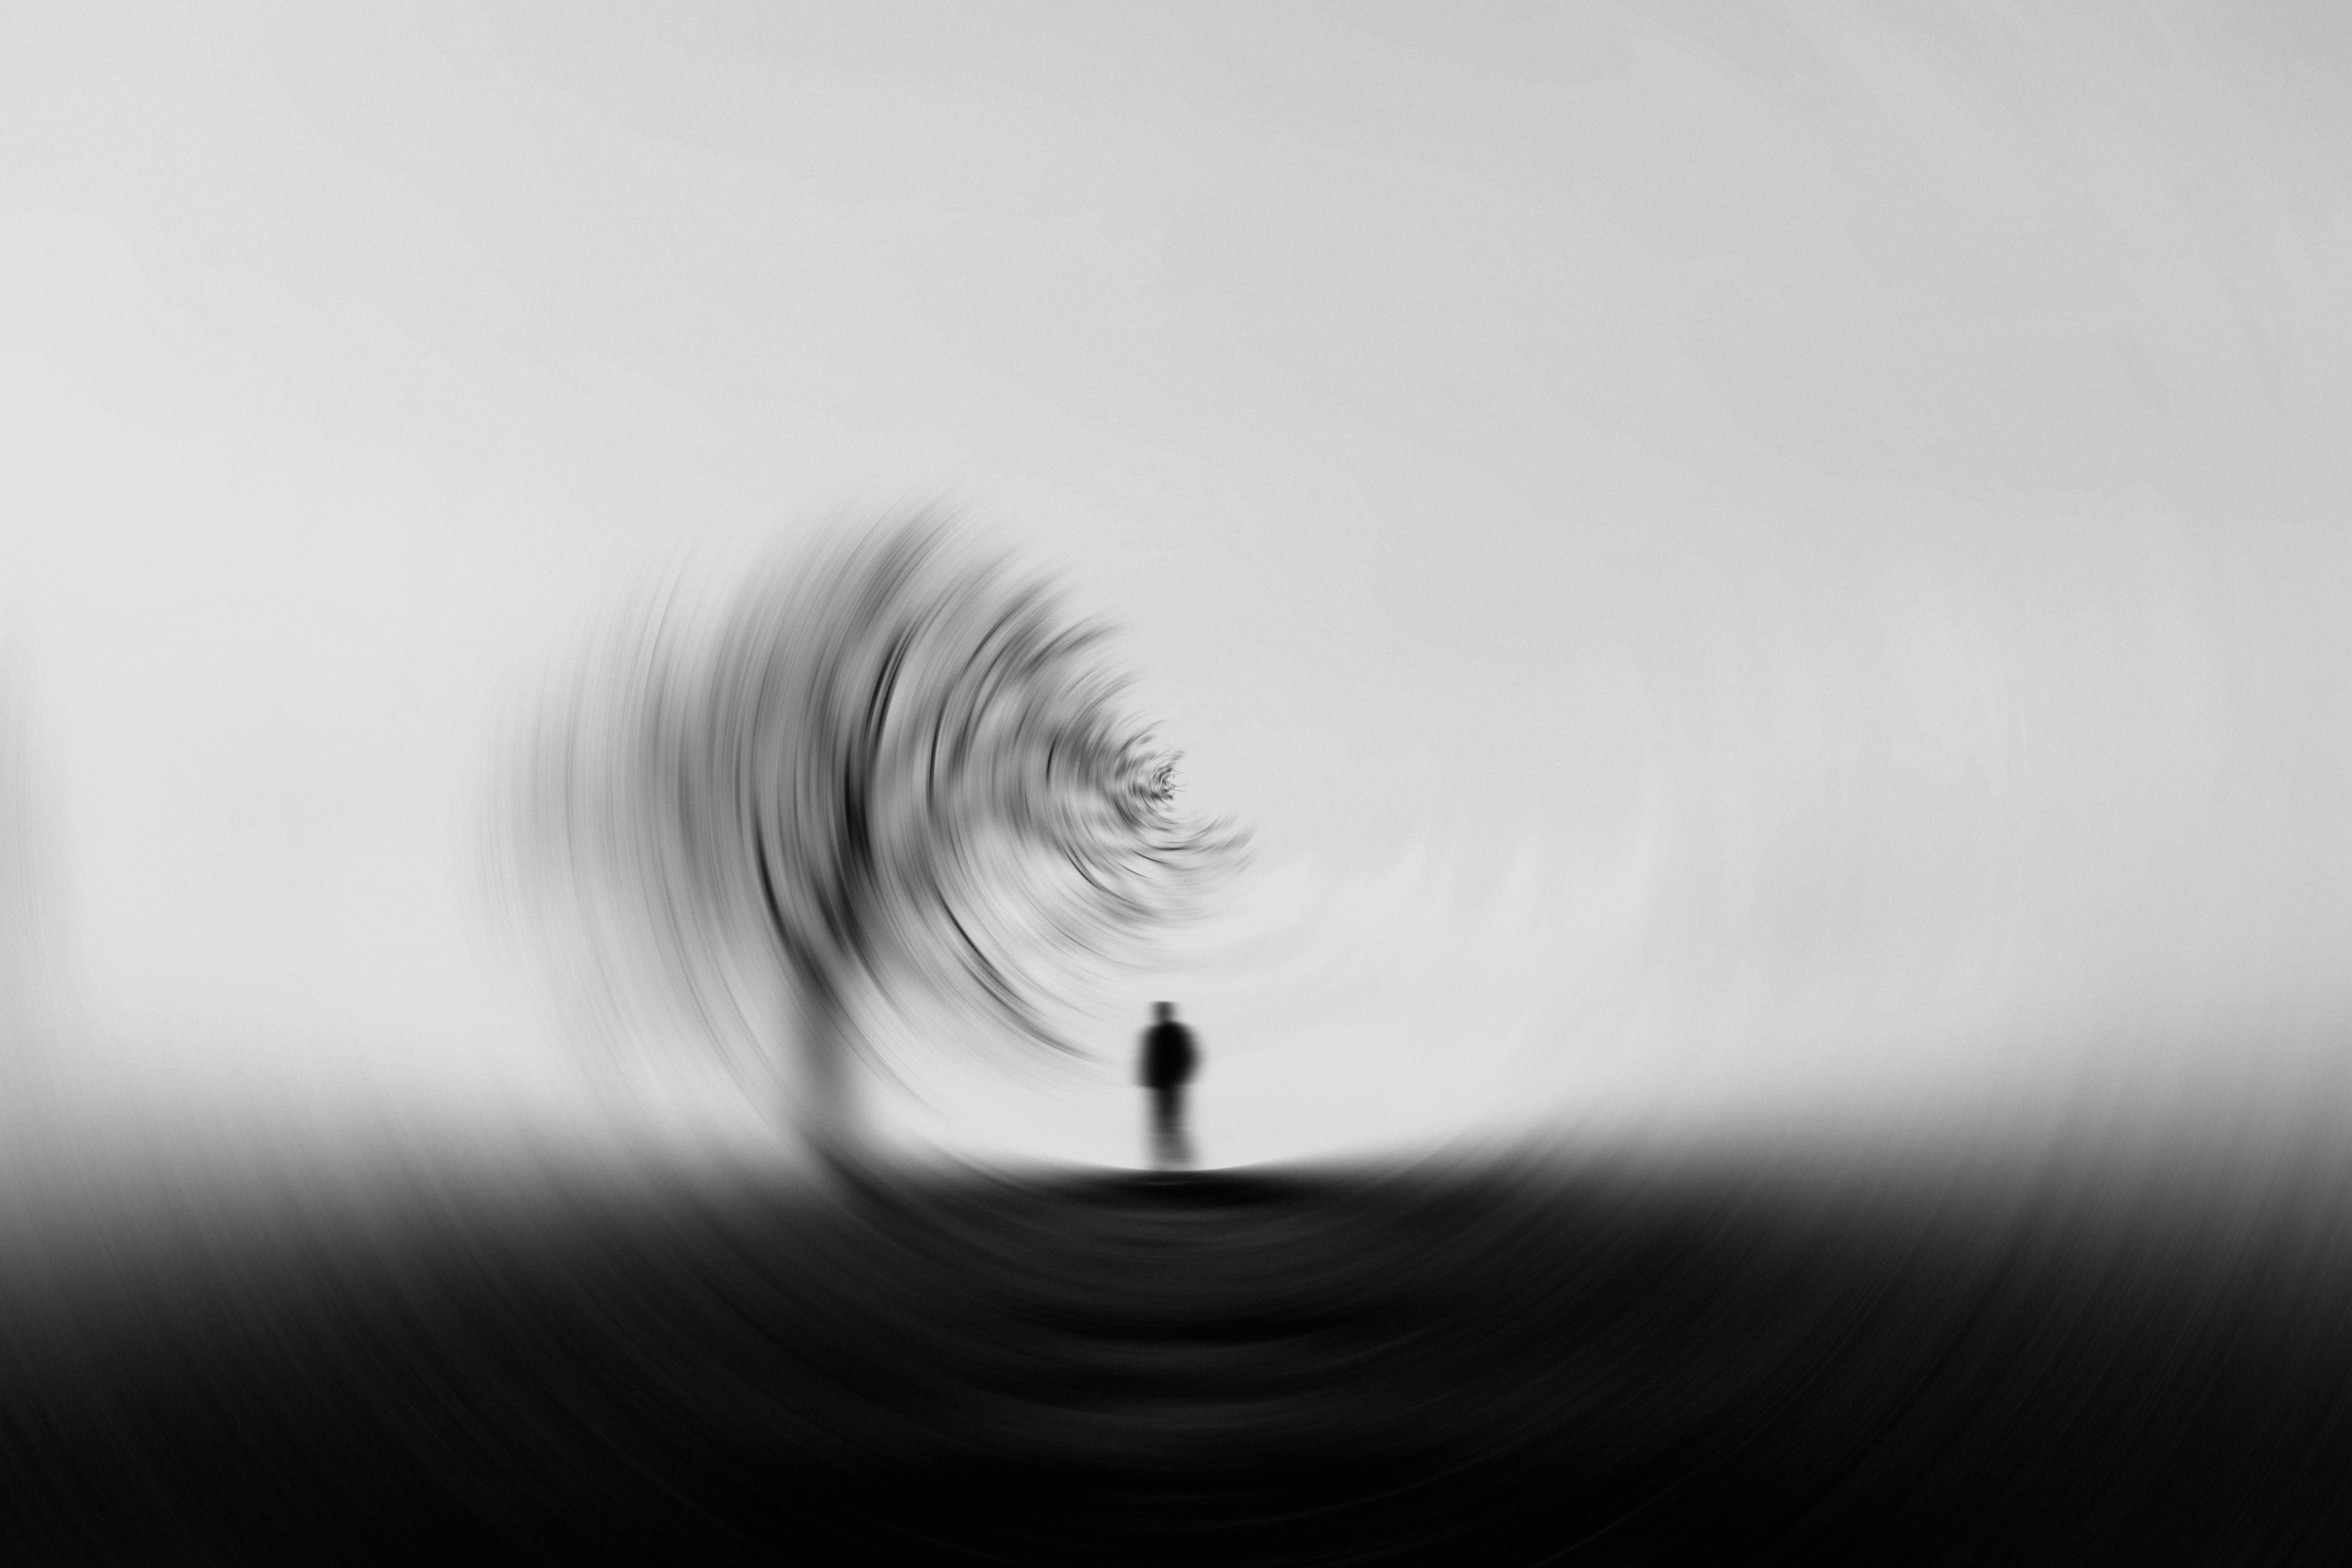 chb, bw, silhouette, smooth, blur, miscellanea, miscellaneous, wood, tree, effect